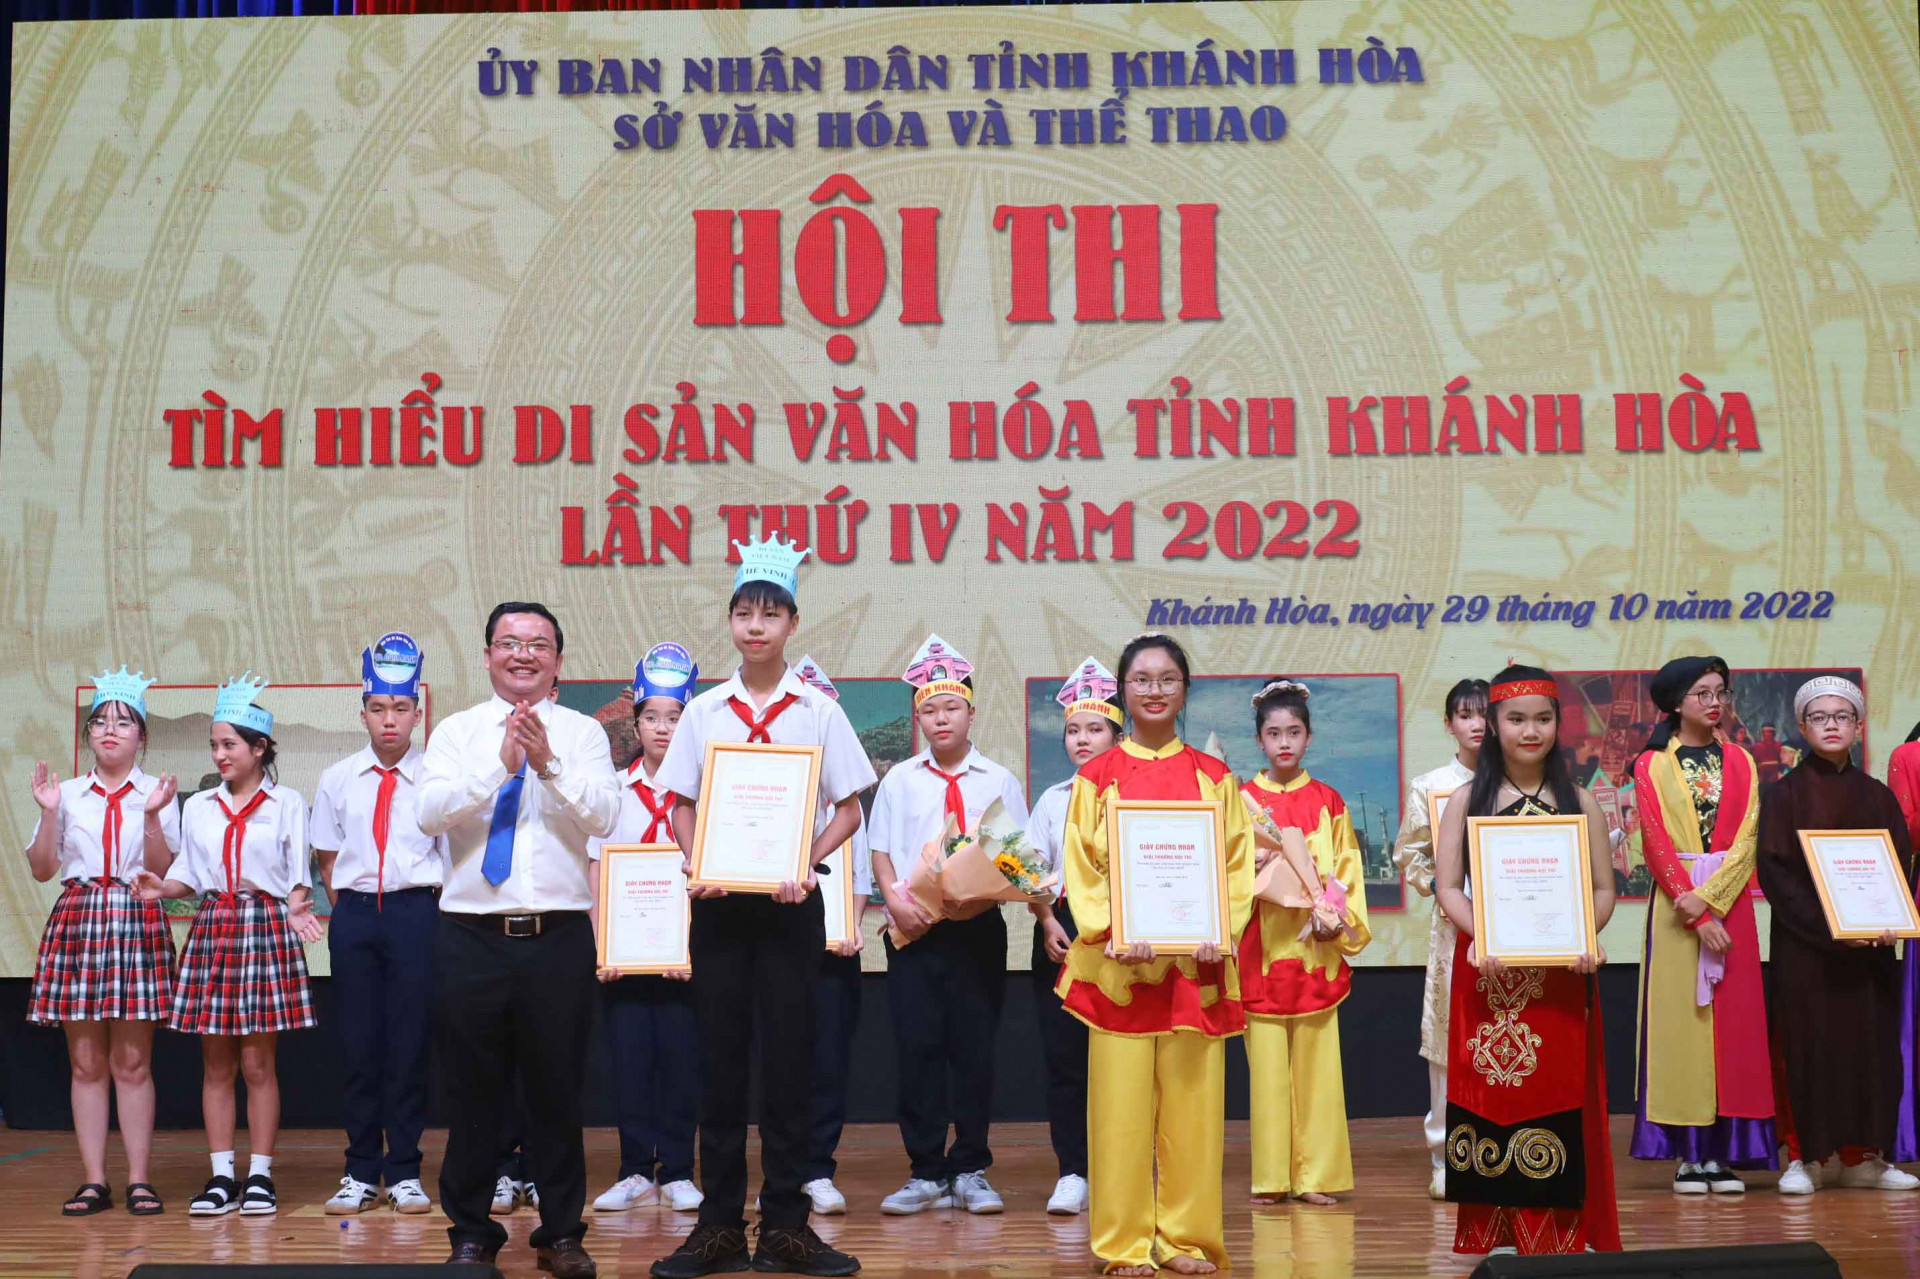 Leader of Ninh Hoa Town People's Committee giving the second prizes to teams